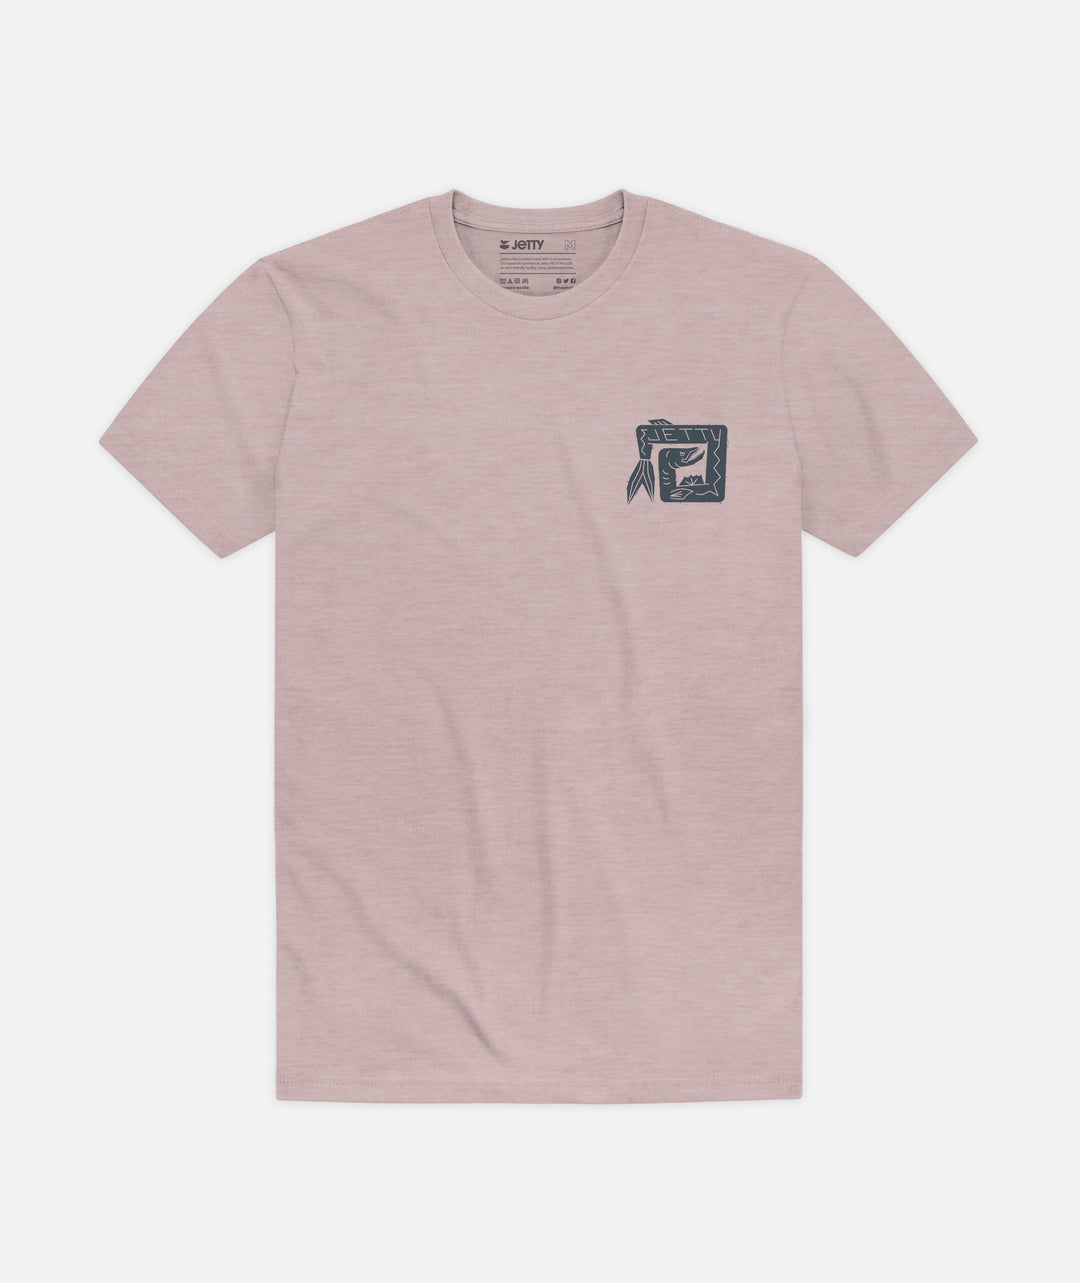 Fang Tooth Tee - Taupe - Sun Diego Boardshop